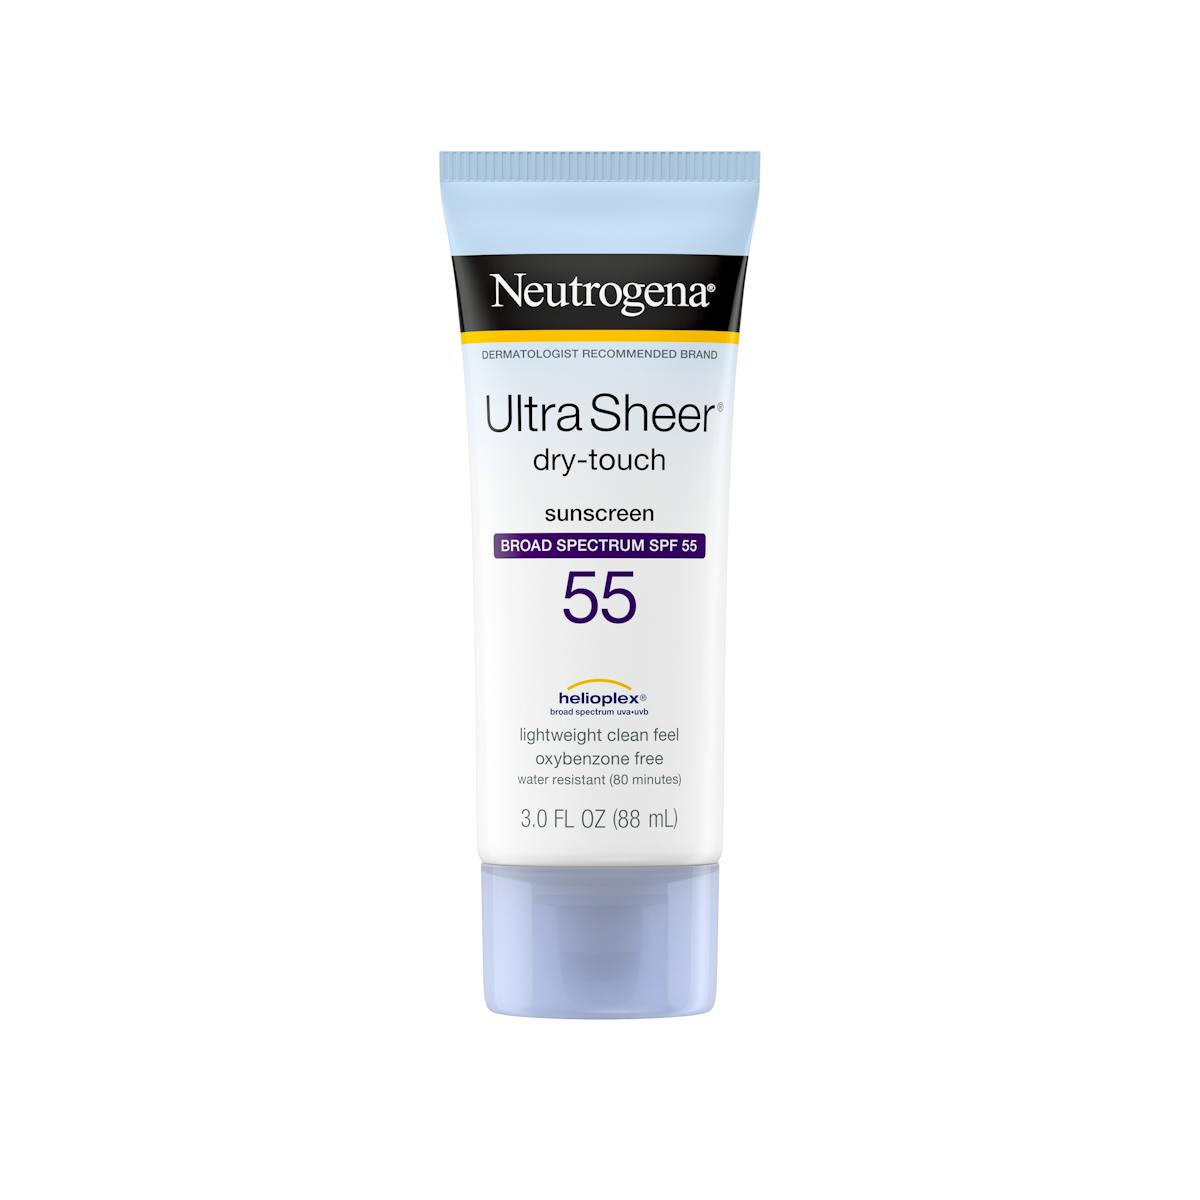 This Neutrogena Sunscreen Is a Travel Must-have